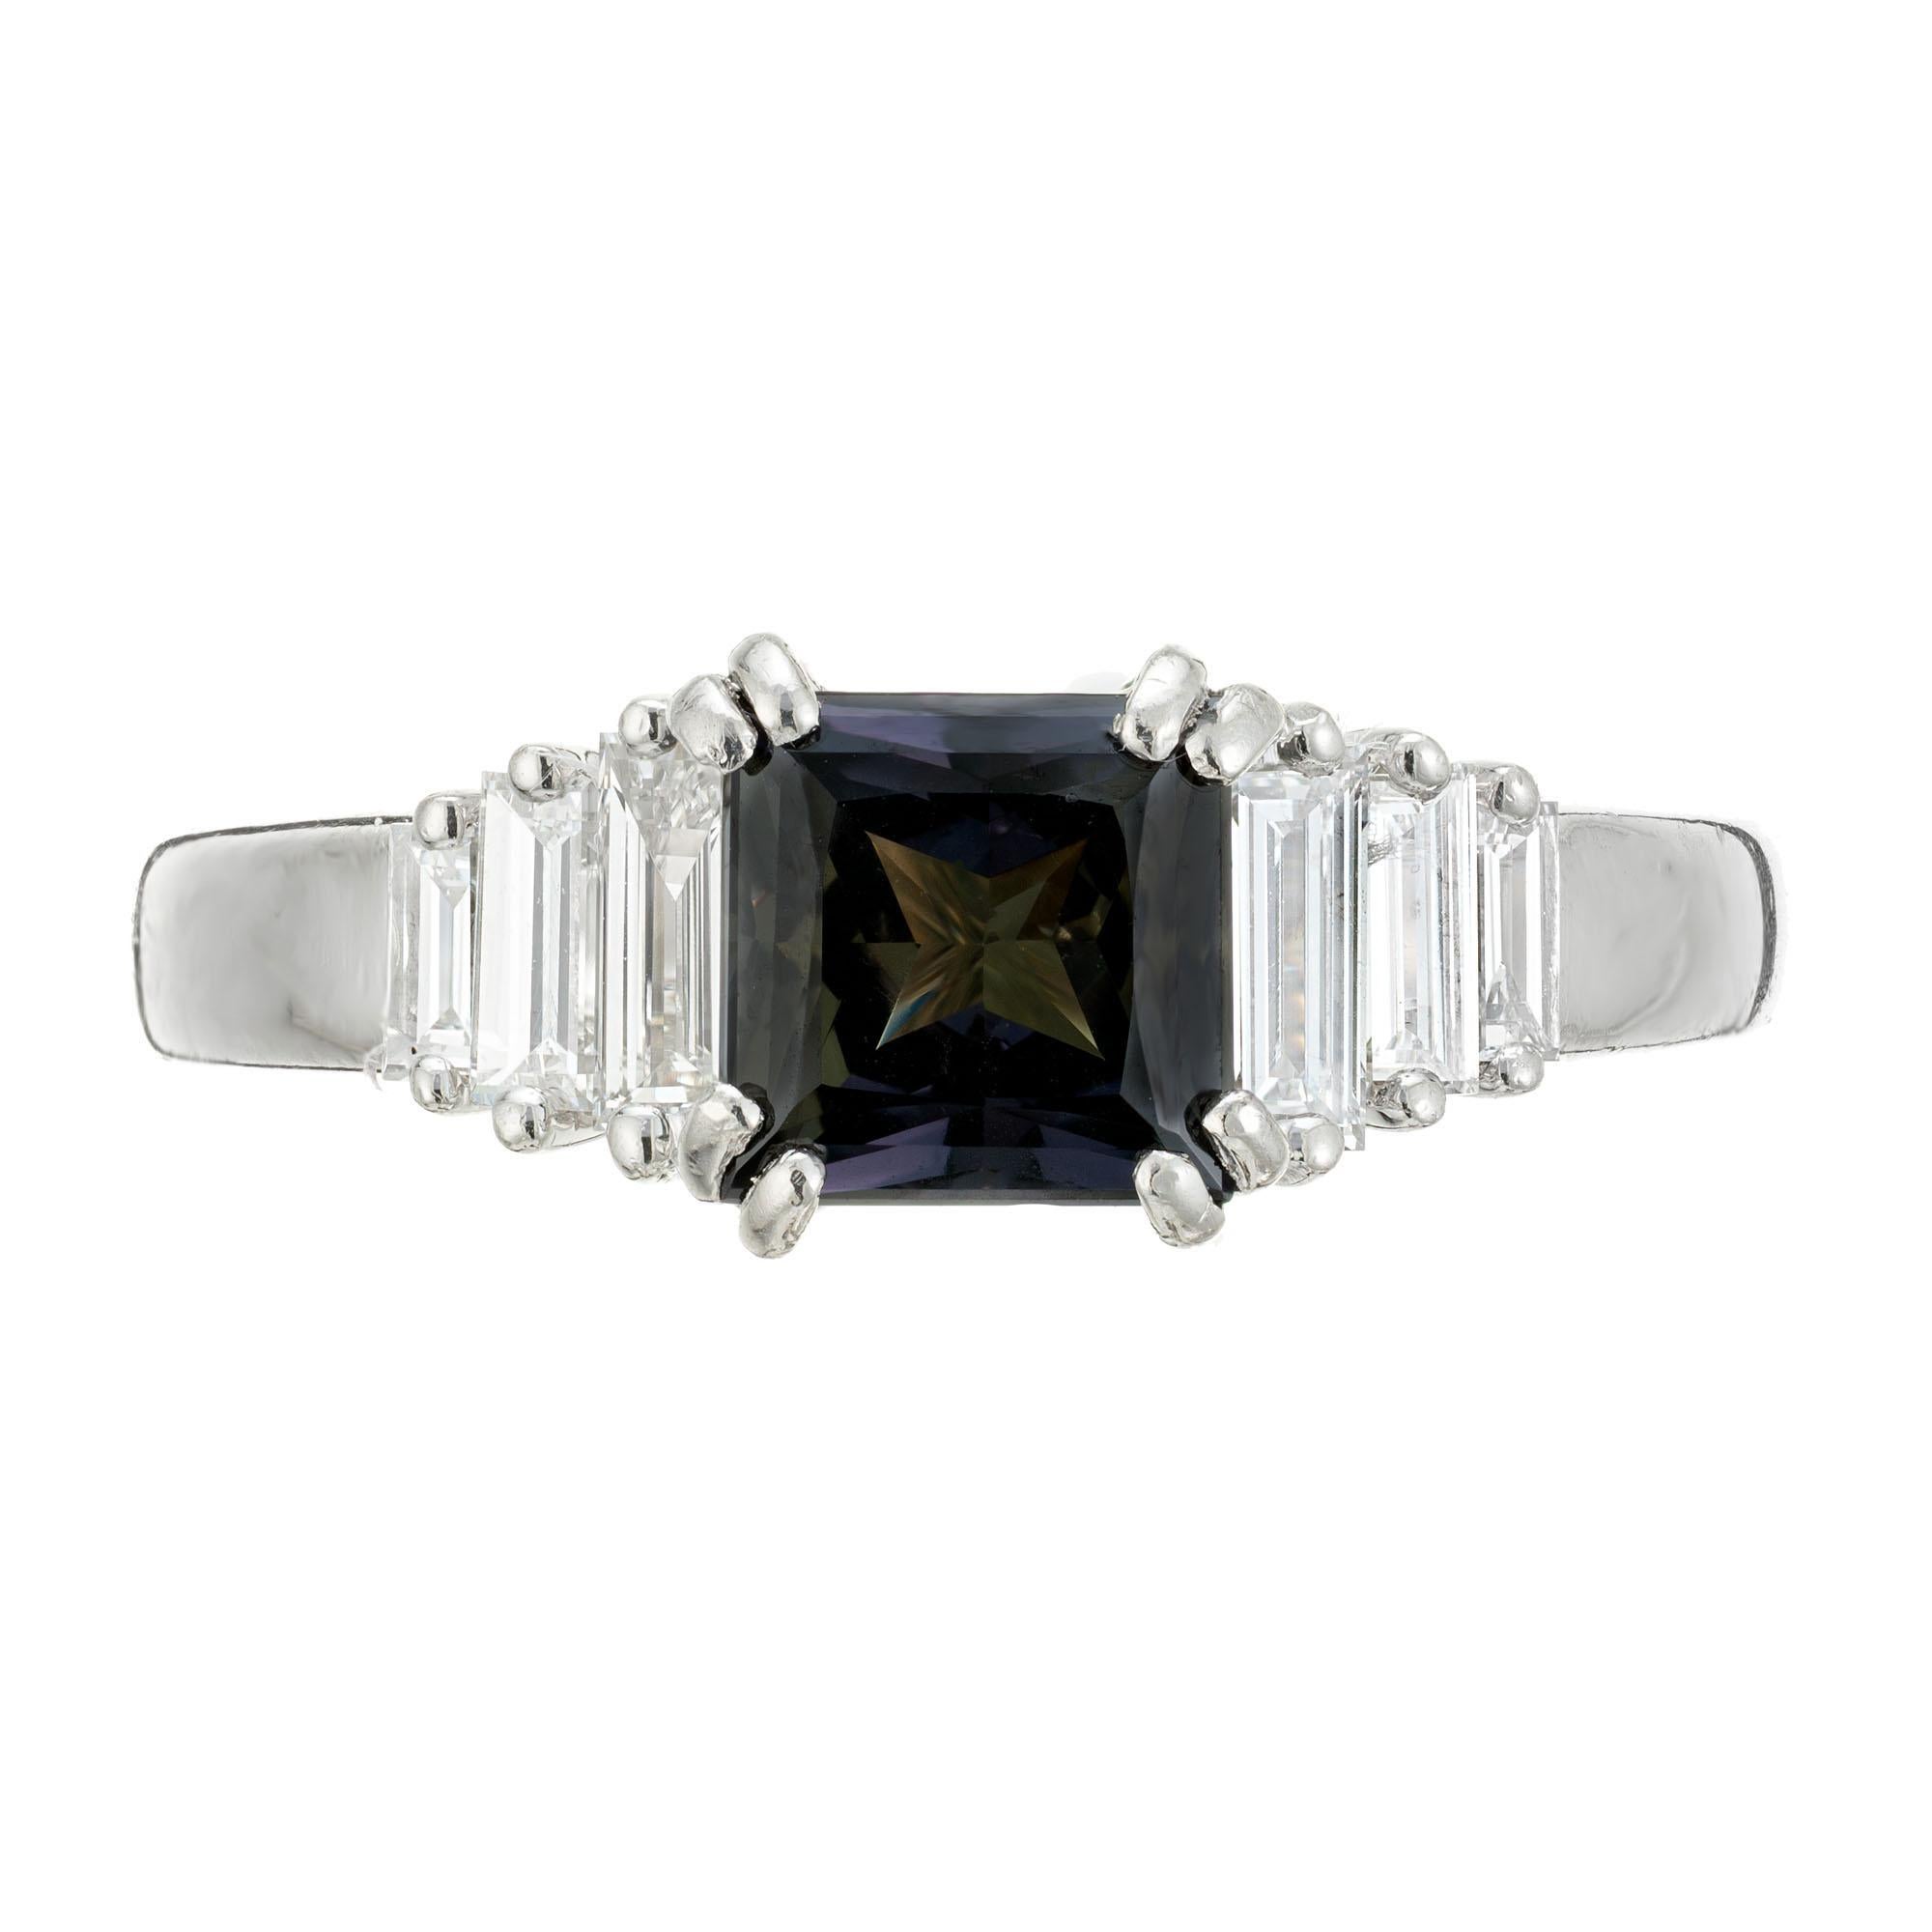 Sapphire and diamond engagement ring. AGL certified center green sapphire set in a platinum setting with 6 straight graduated baguette diamonds. Circa 1950-1960

1 natural brownish green square Sapphire approx. total weight 1.41cts AGL certificate #